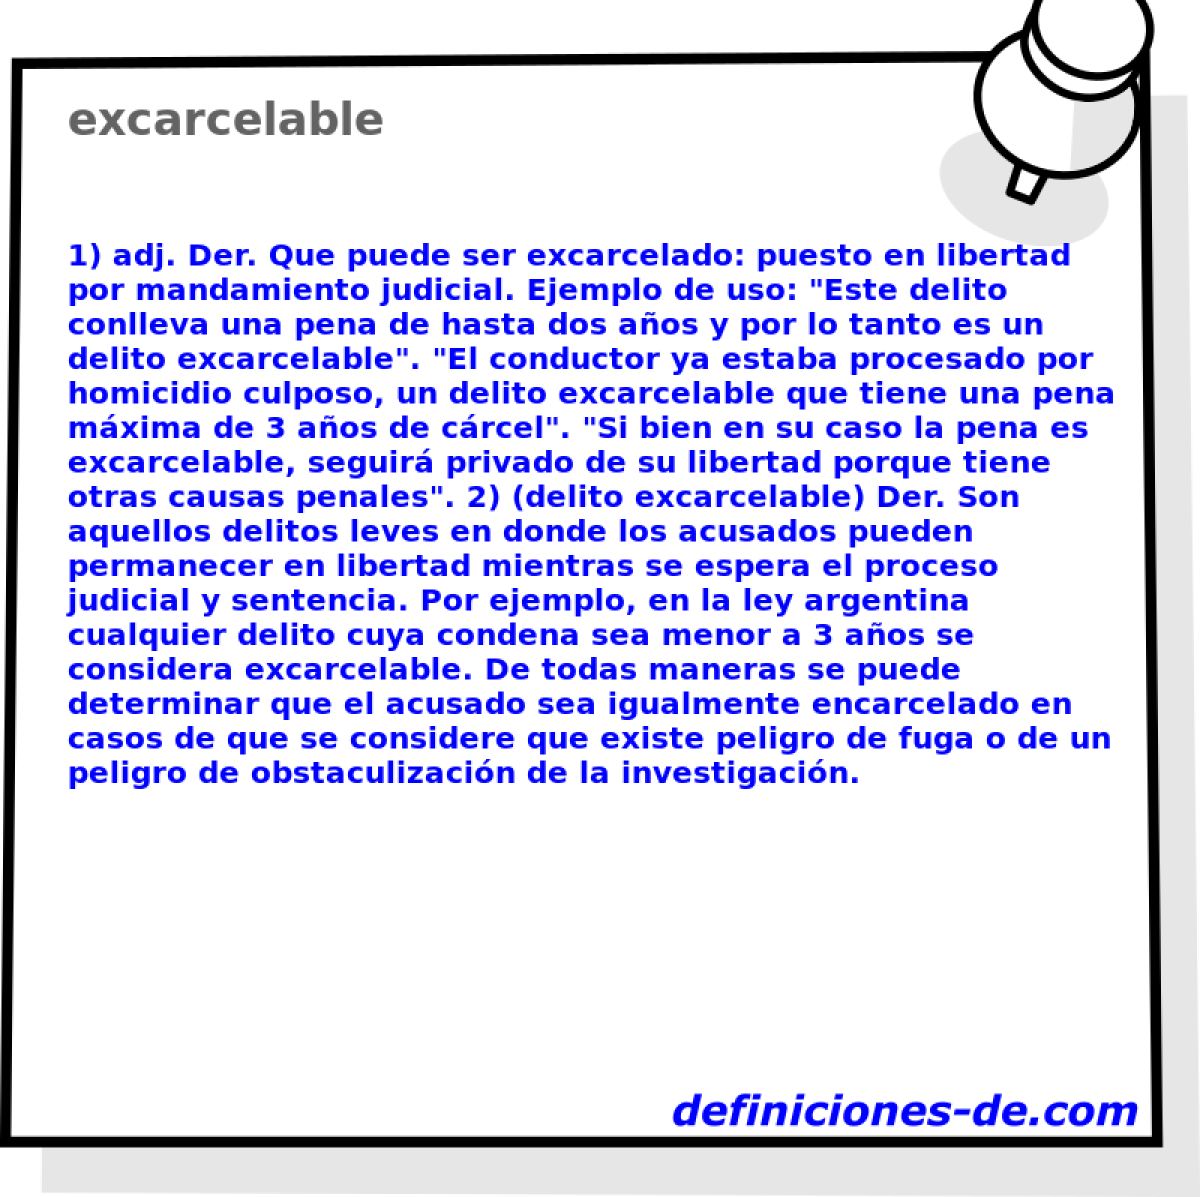 excarcelable 